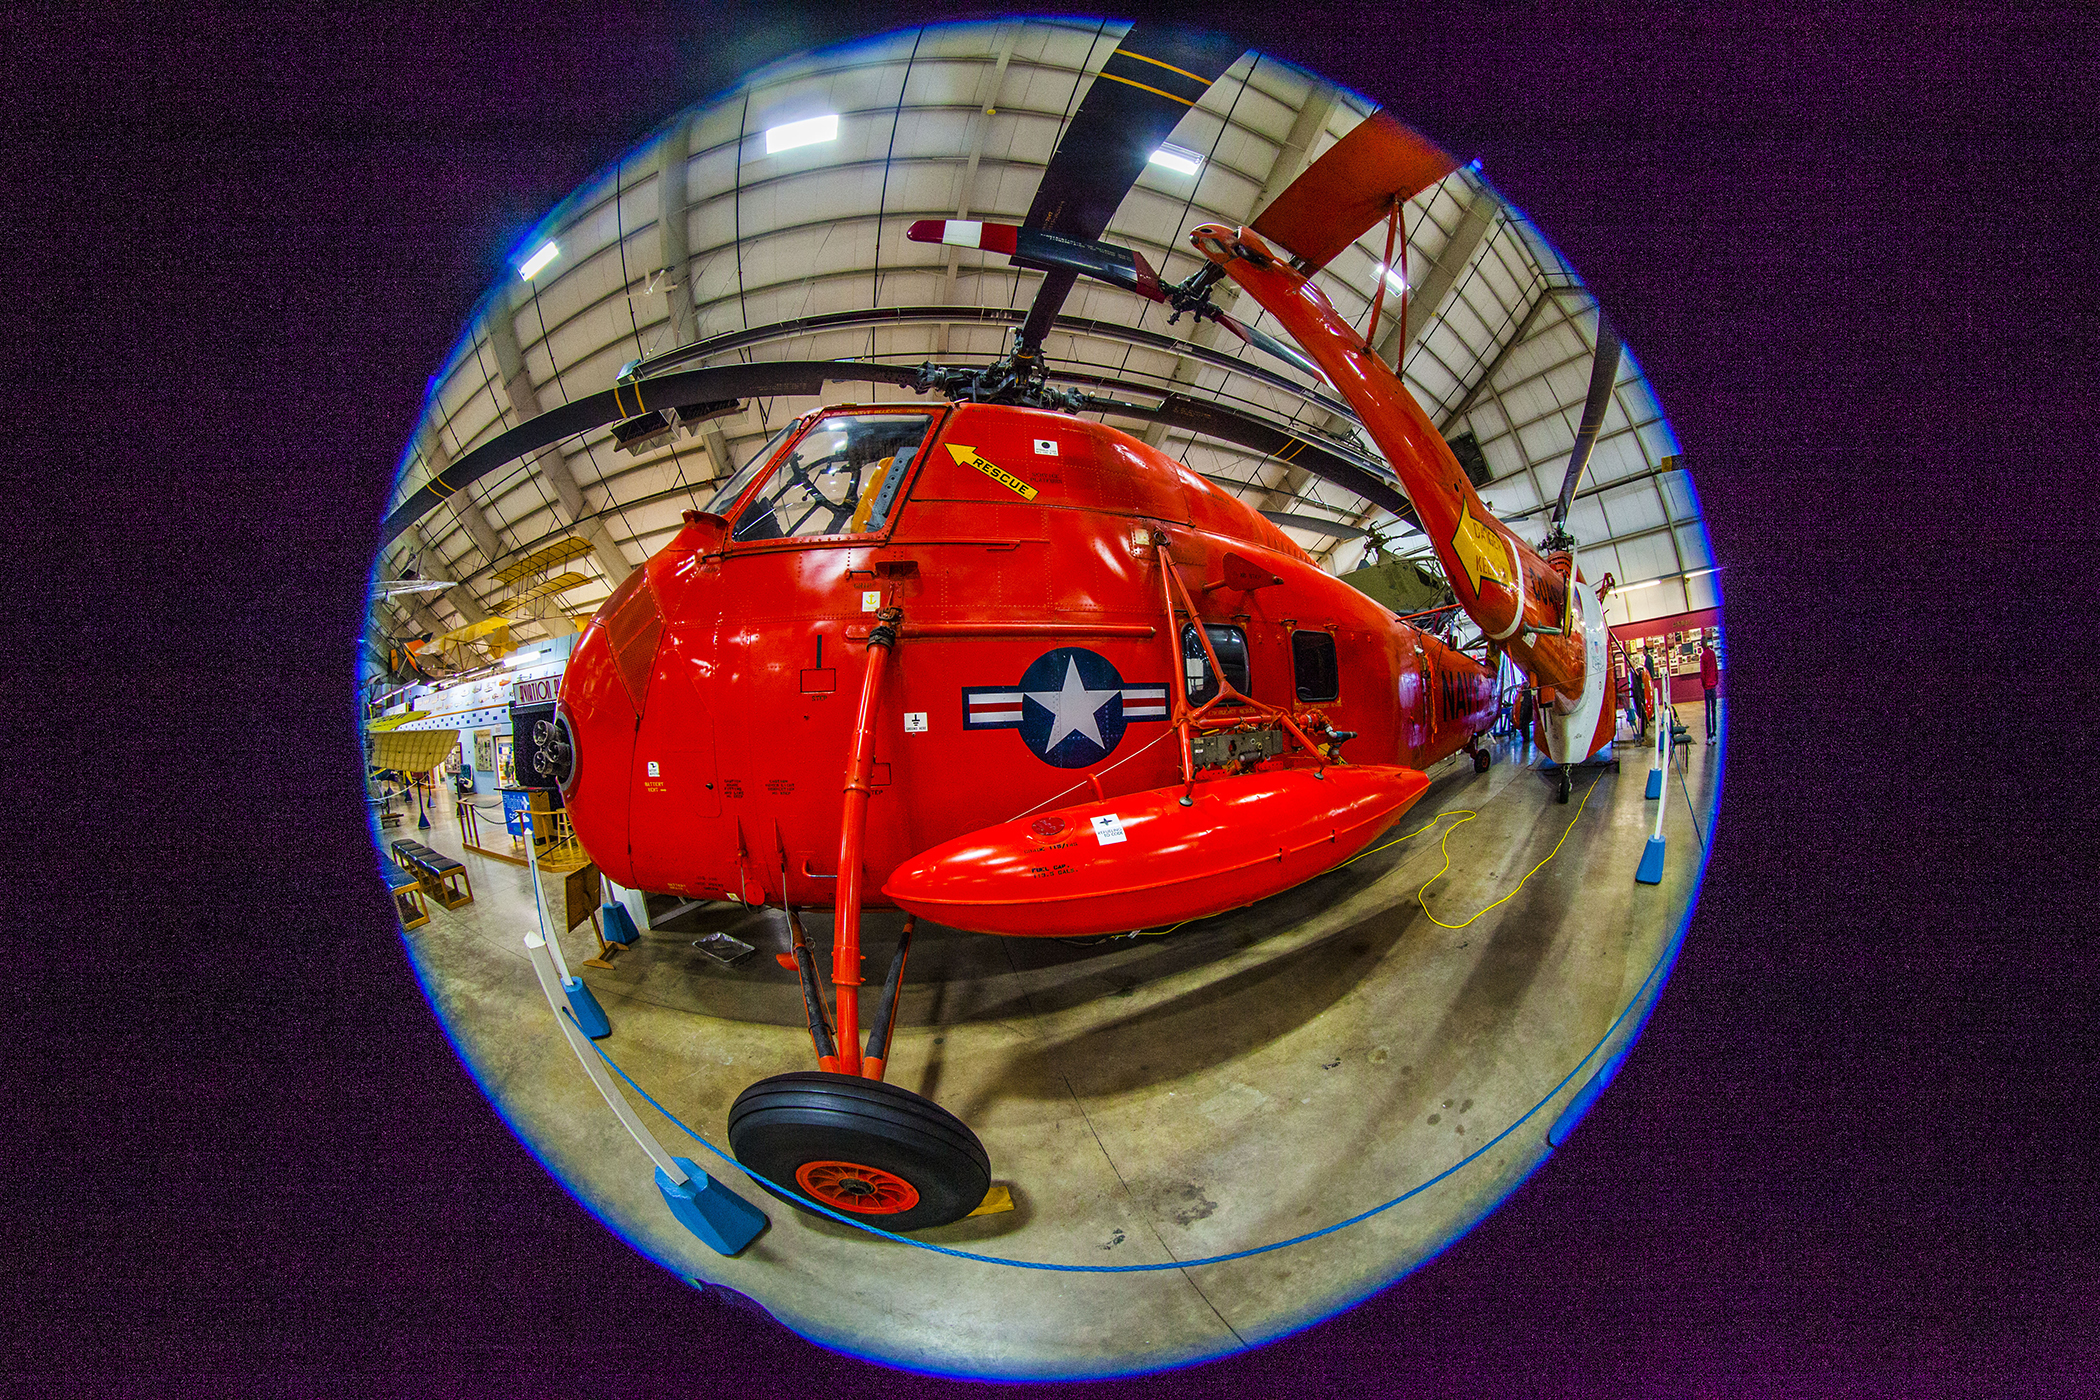 Windsor Locks Red Helicopter at New England Air Museum